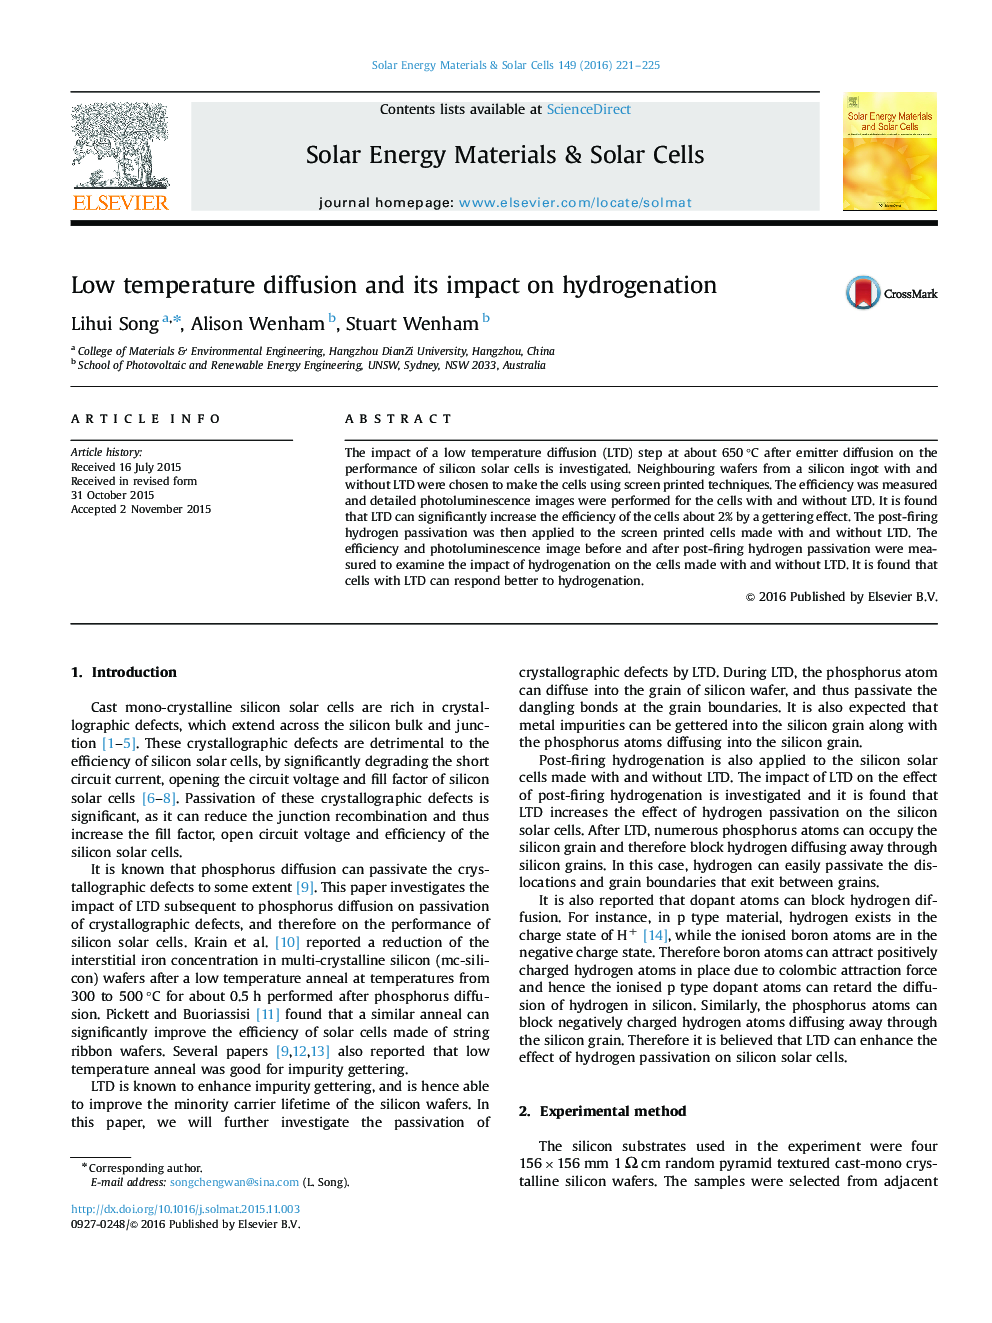 Low temperature diffusion and its impact on hydrogenation